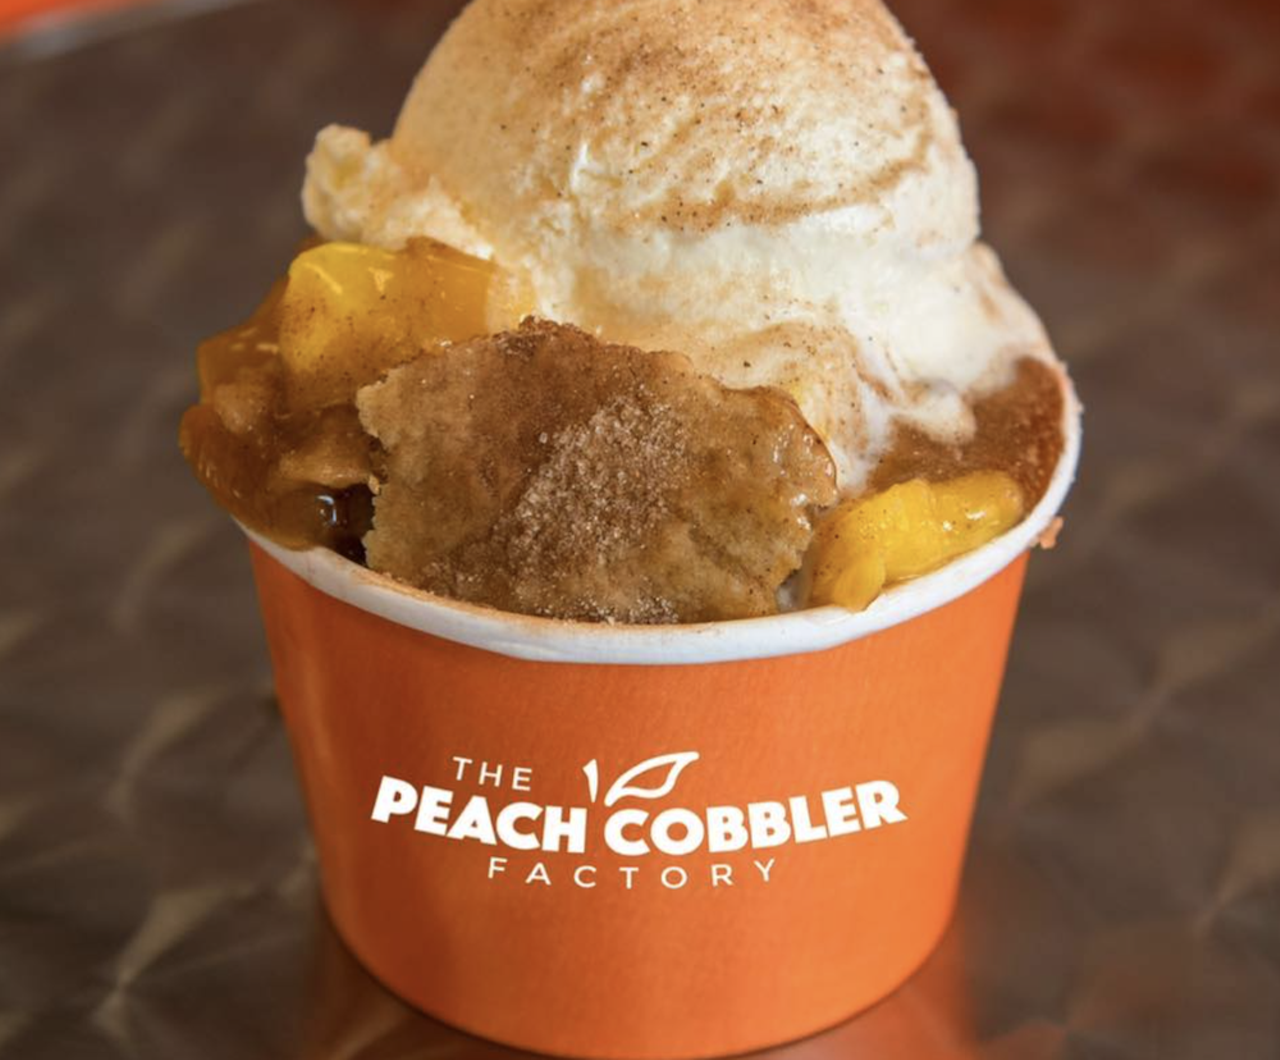 Peach Cobbler Factory
Tampa
Alongside different types of cobbler, the Peach Cobbler Factory—set to open until spring of 2022—will also offer other sweet treats like banana pudding, cinnamon rolls and ice cream. The first Florida location doesn’t have an addressyet, but its Instagram page states that lease negotiations are underway, and that it will update its future patrons with any further details.